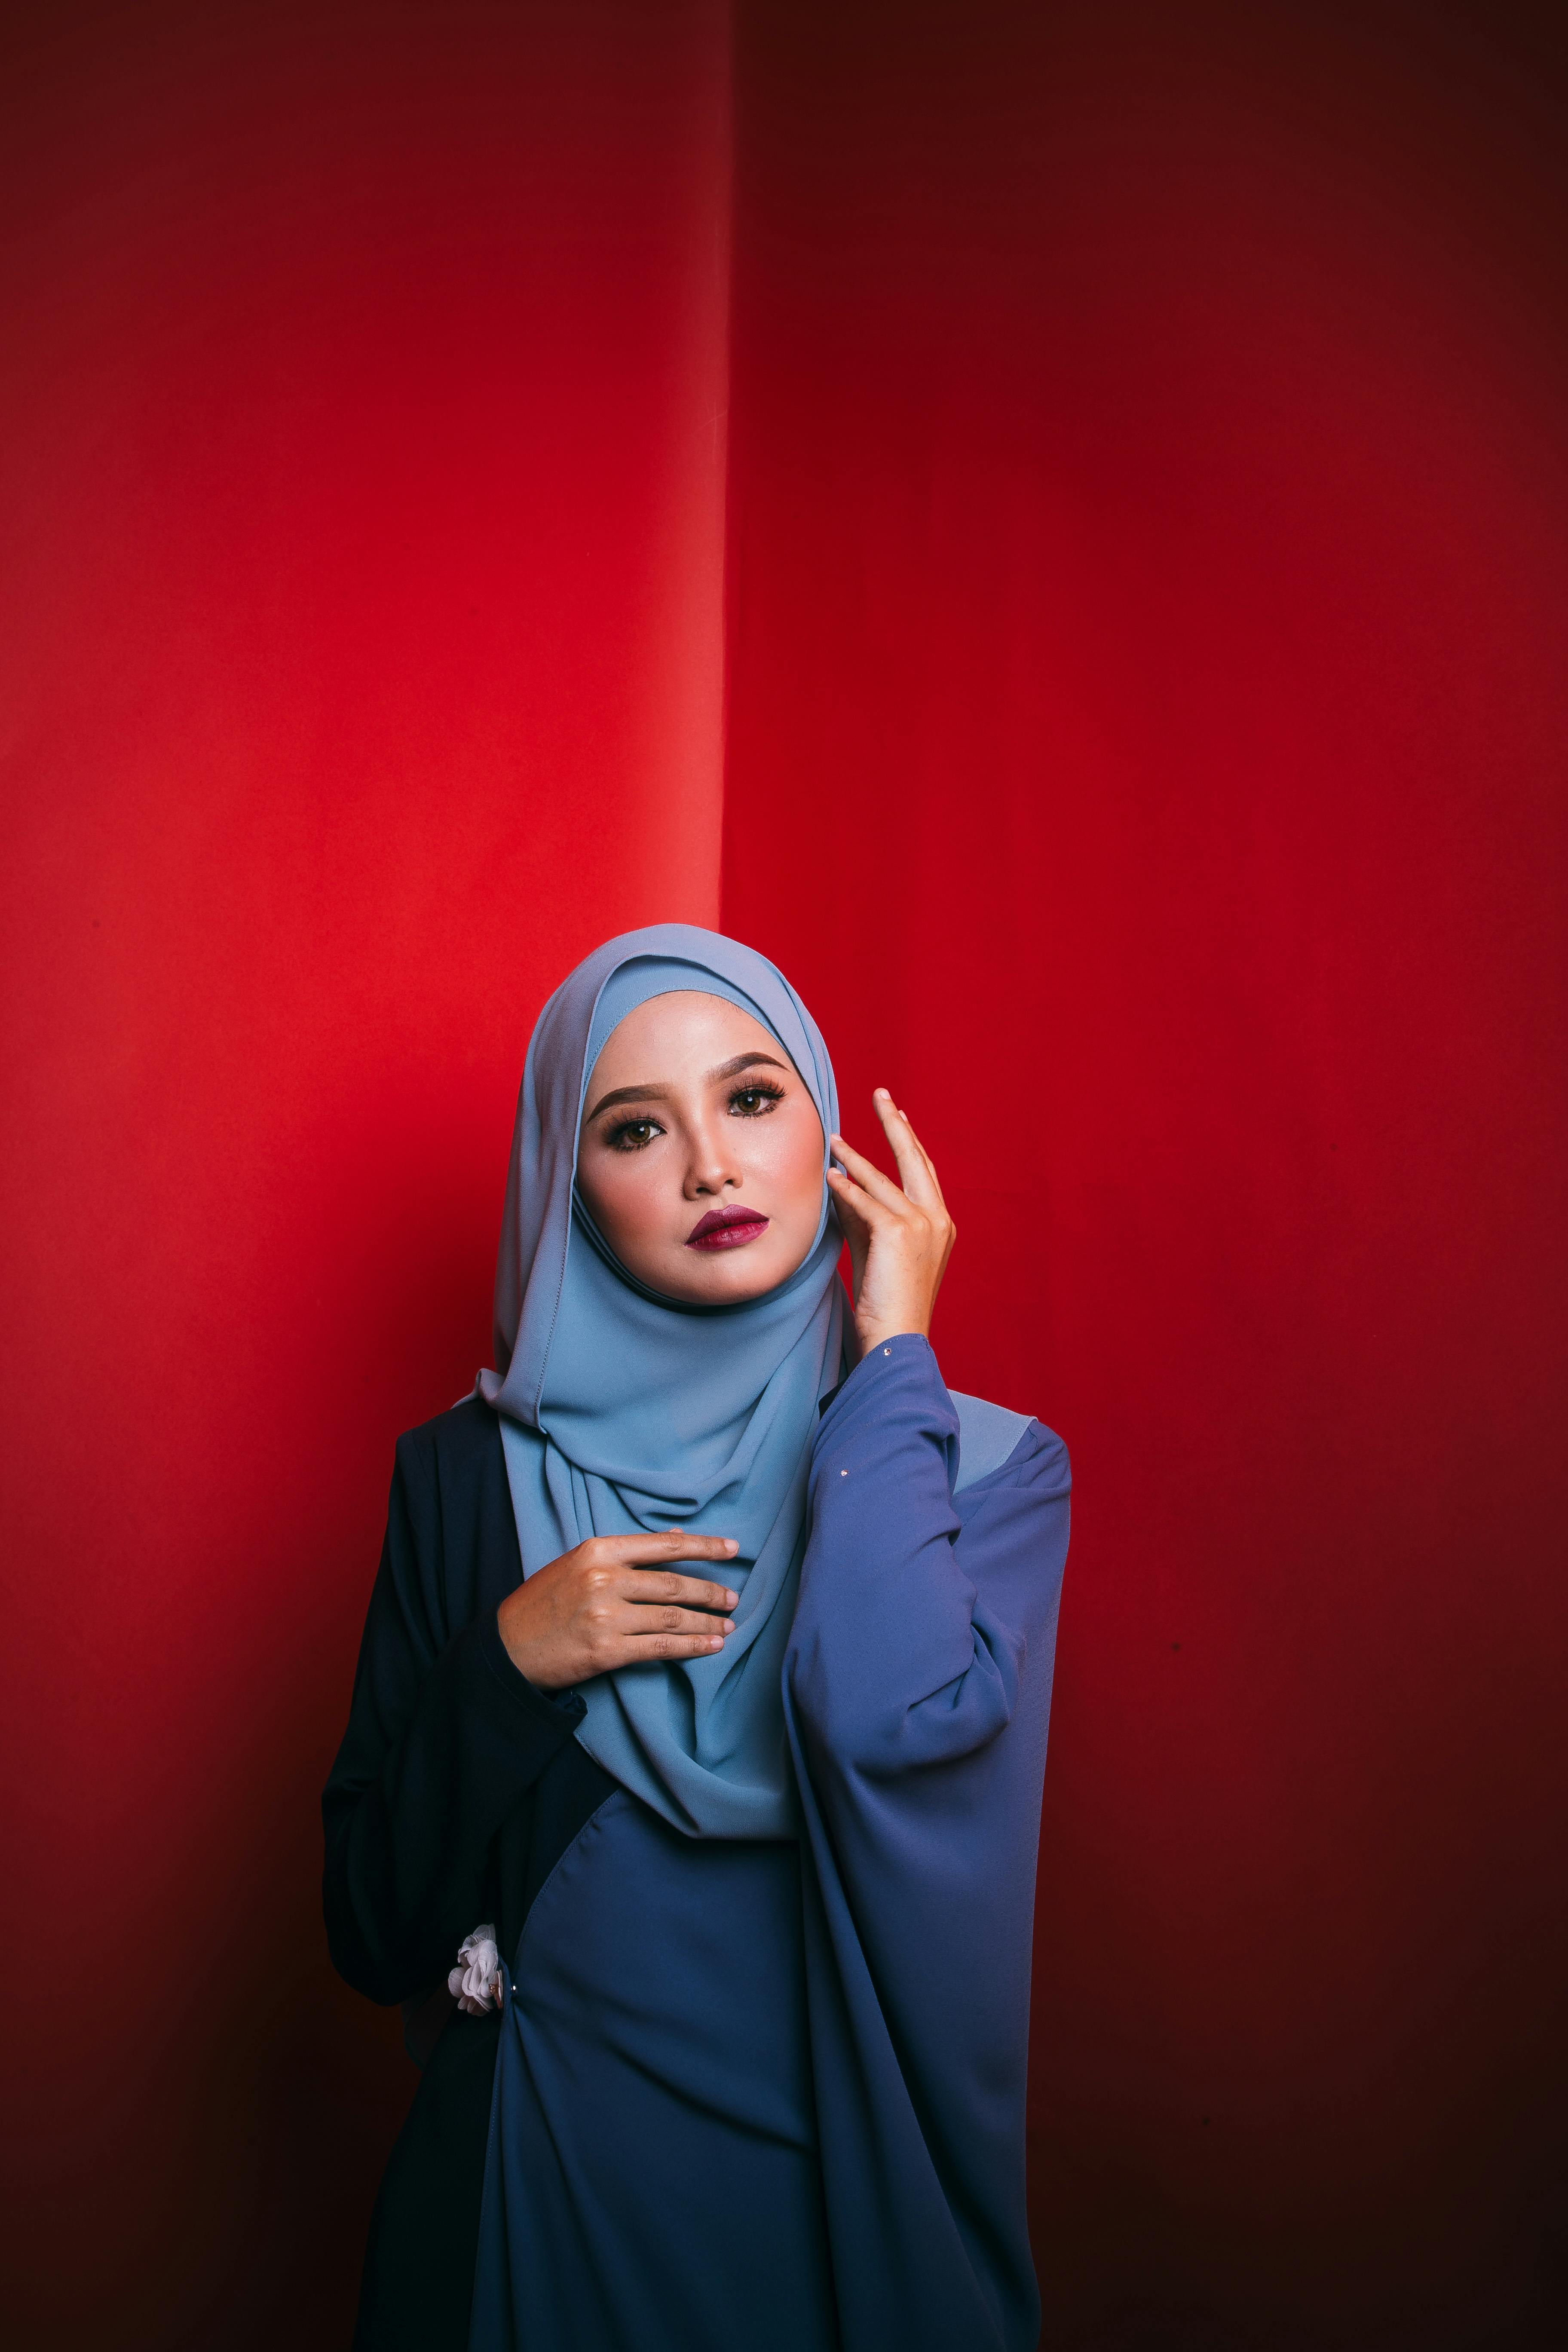 Woman in blue white and red hijab photo – Free Man alone Image on